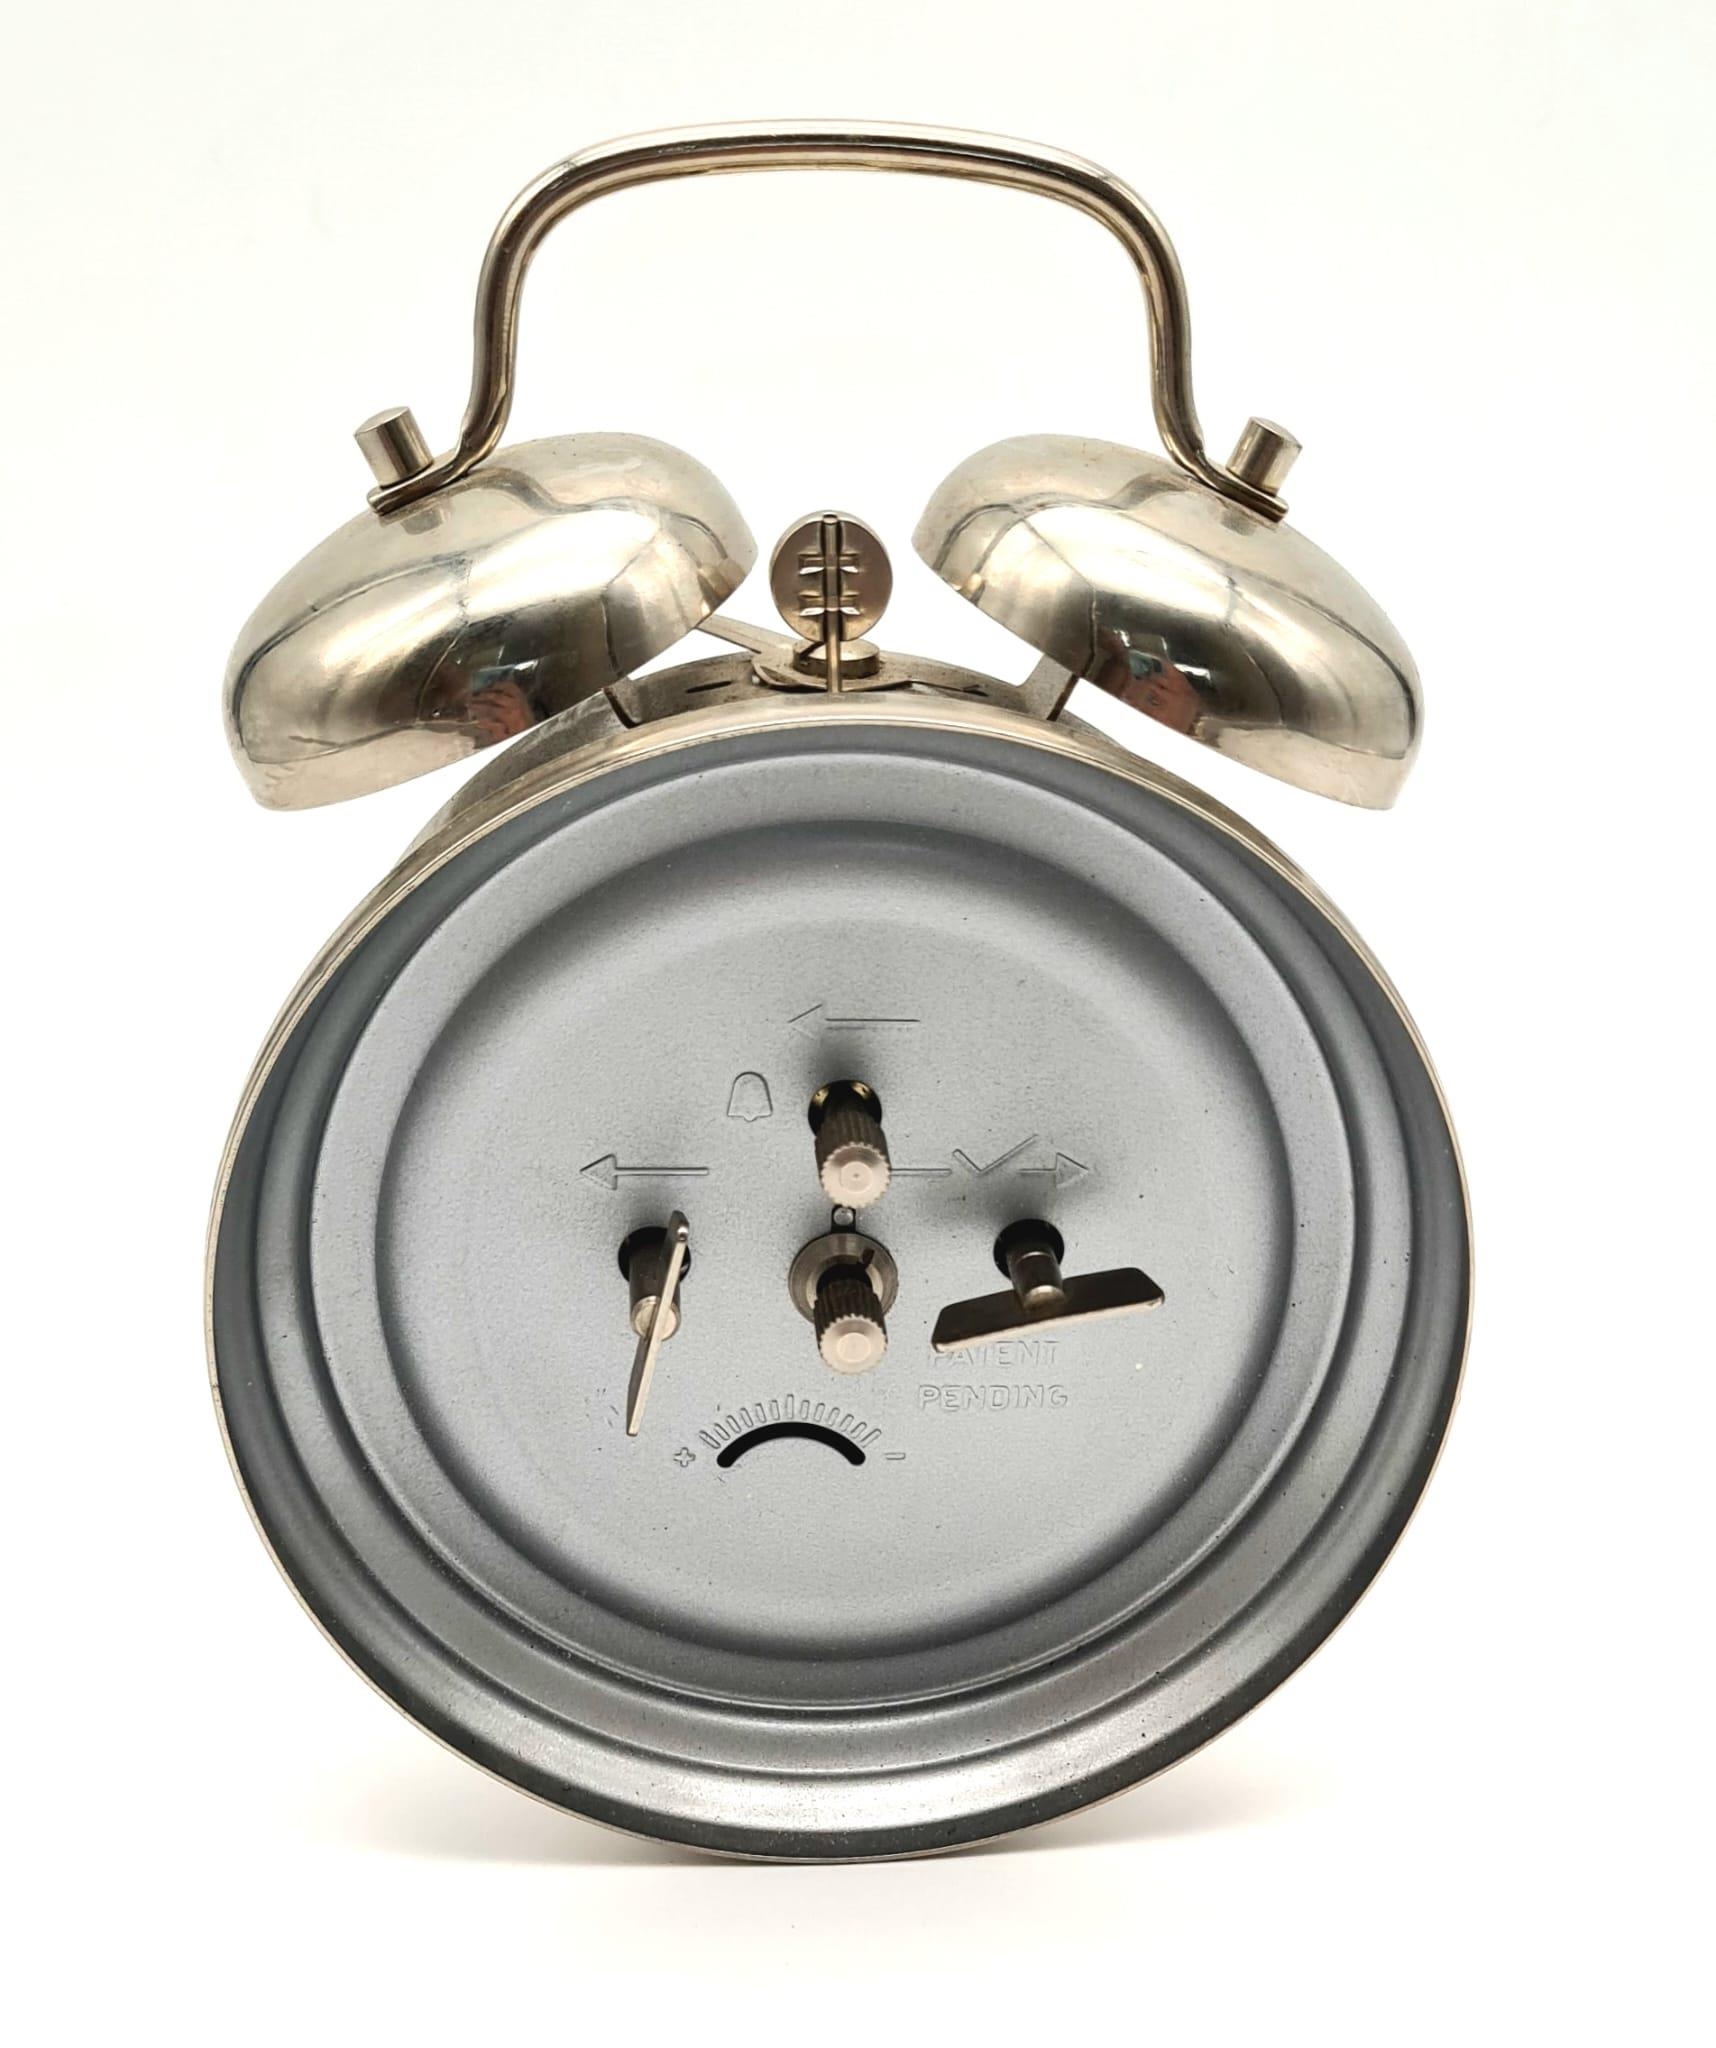 A Backwards Double Bell Alarm Clock. In working order. 16cm tall. - Image 4 of 5